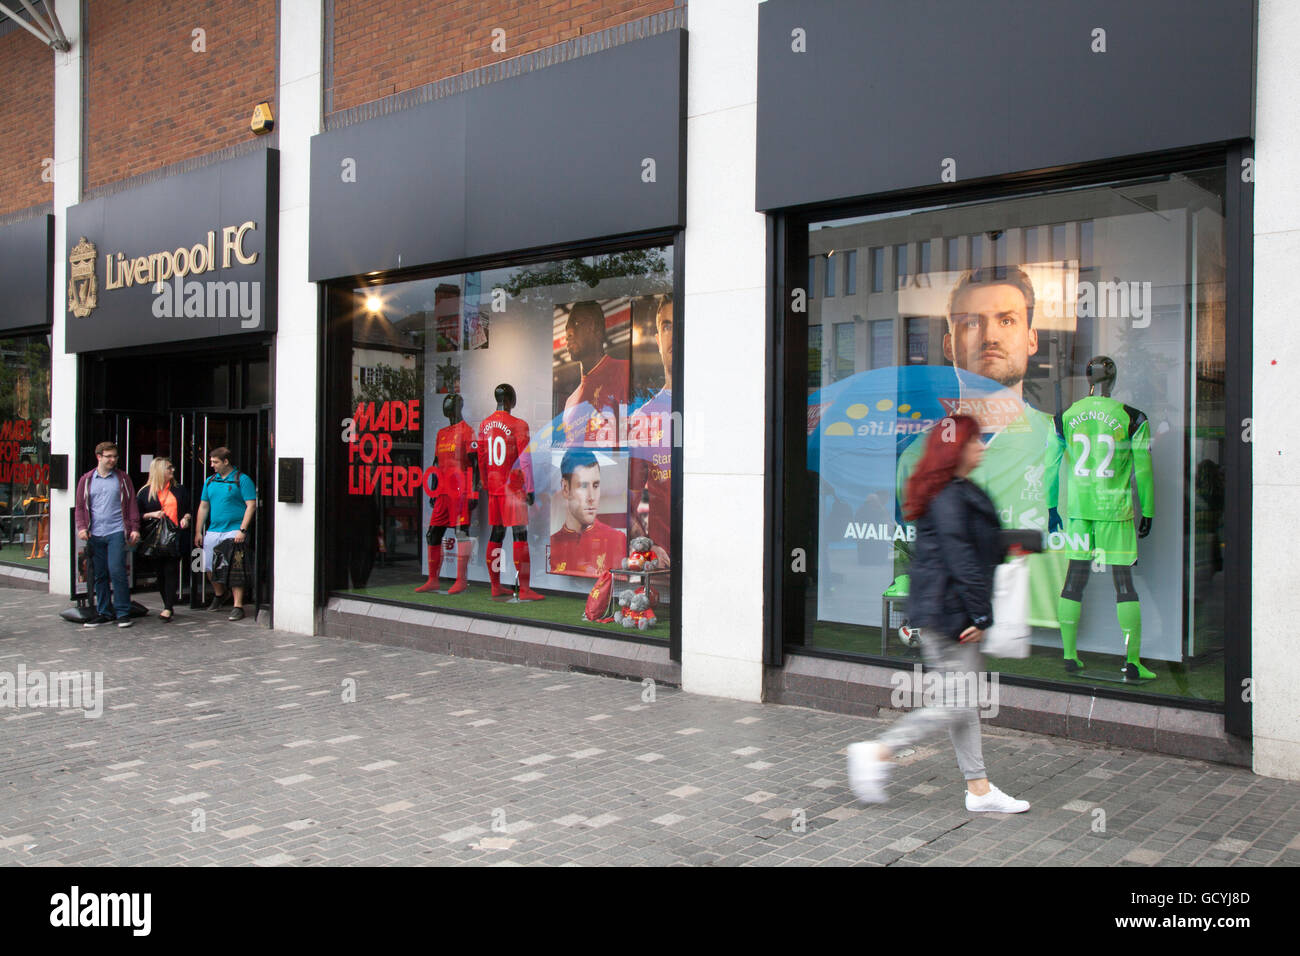 Liverpool FC official retail store for replica kit in Williamson Square, Livepool, Merseyside, UK. Liverpools business district. Stock Photo